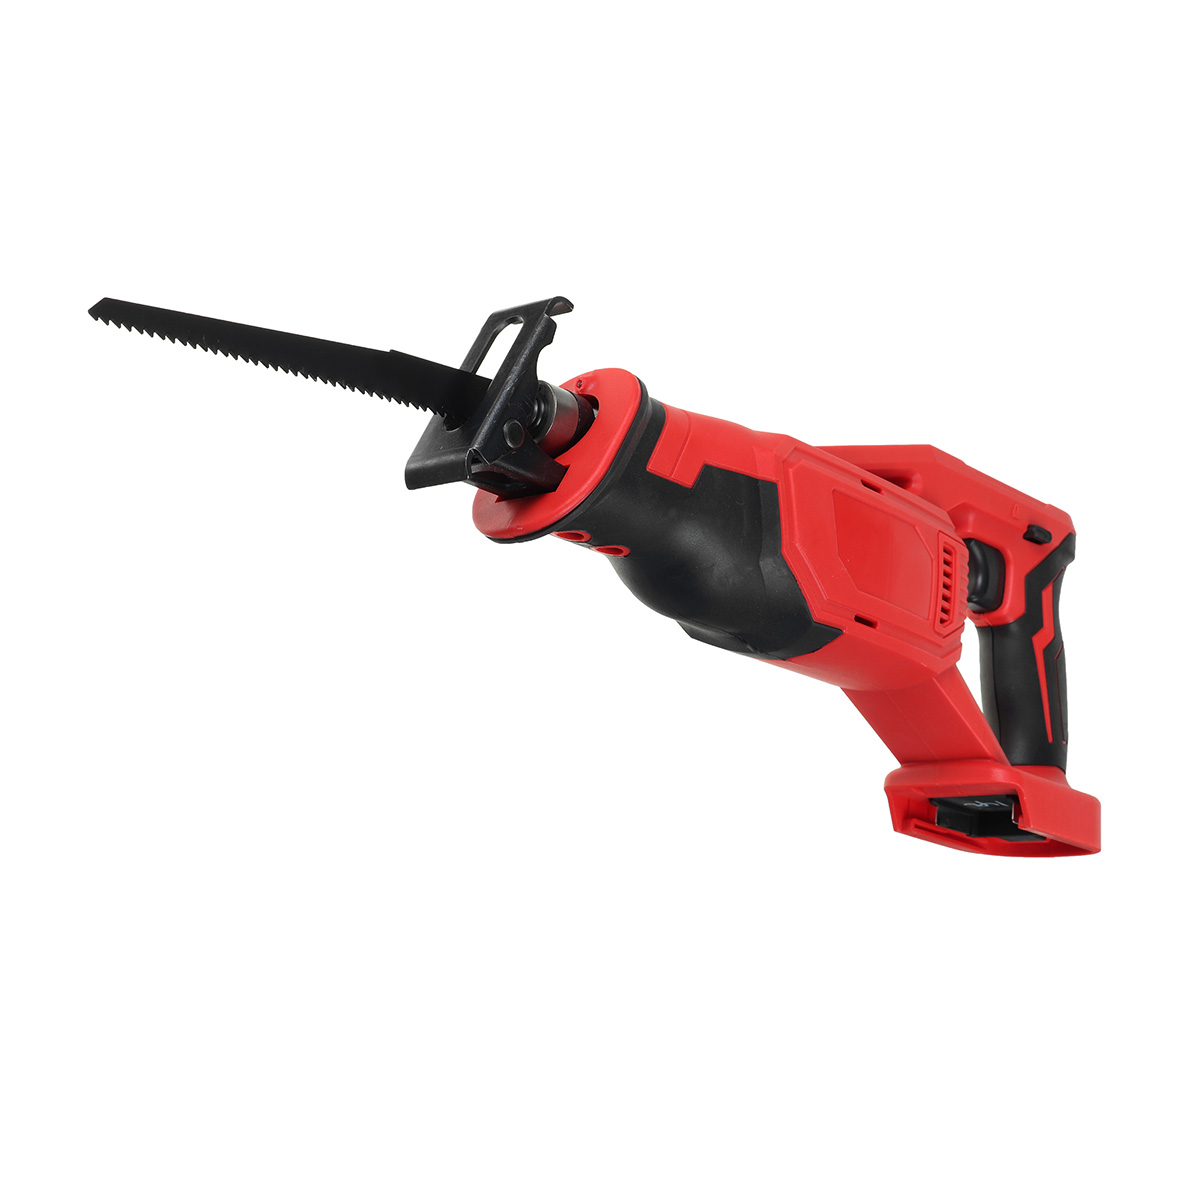 Cordless-Electric-Reciprocating-Saw-PVC-Pipes-Wood-Metal-Cutter-Without-Battery-1816495-8